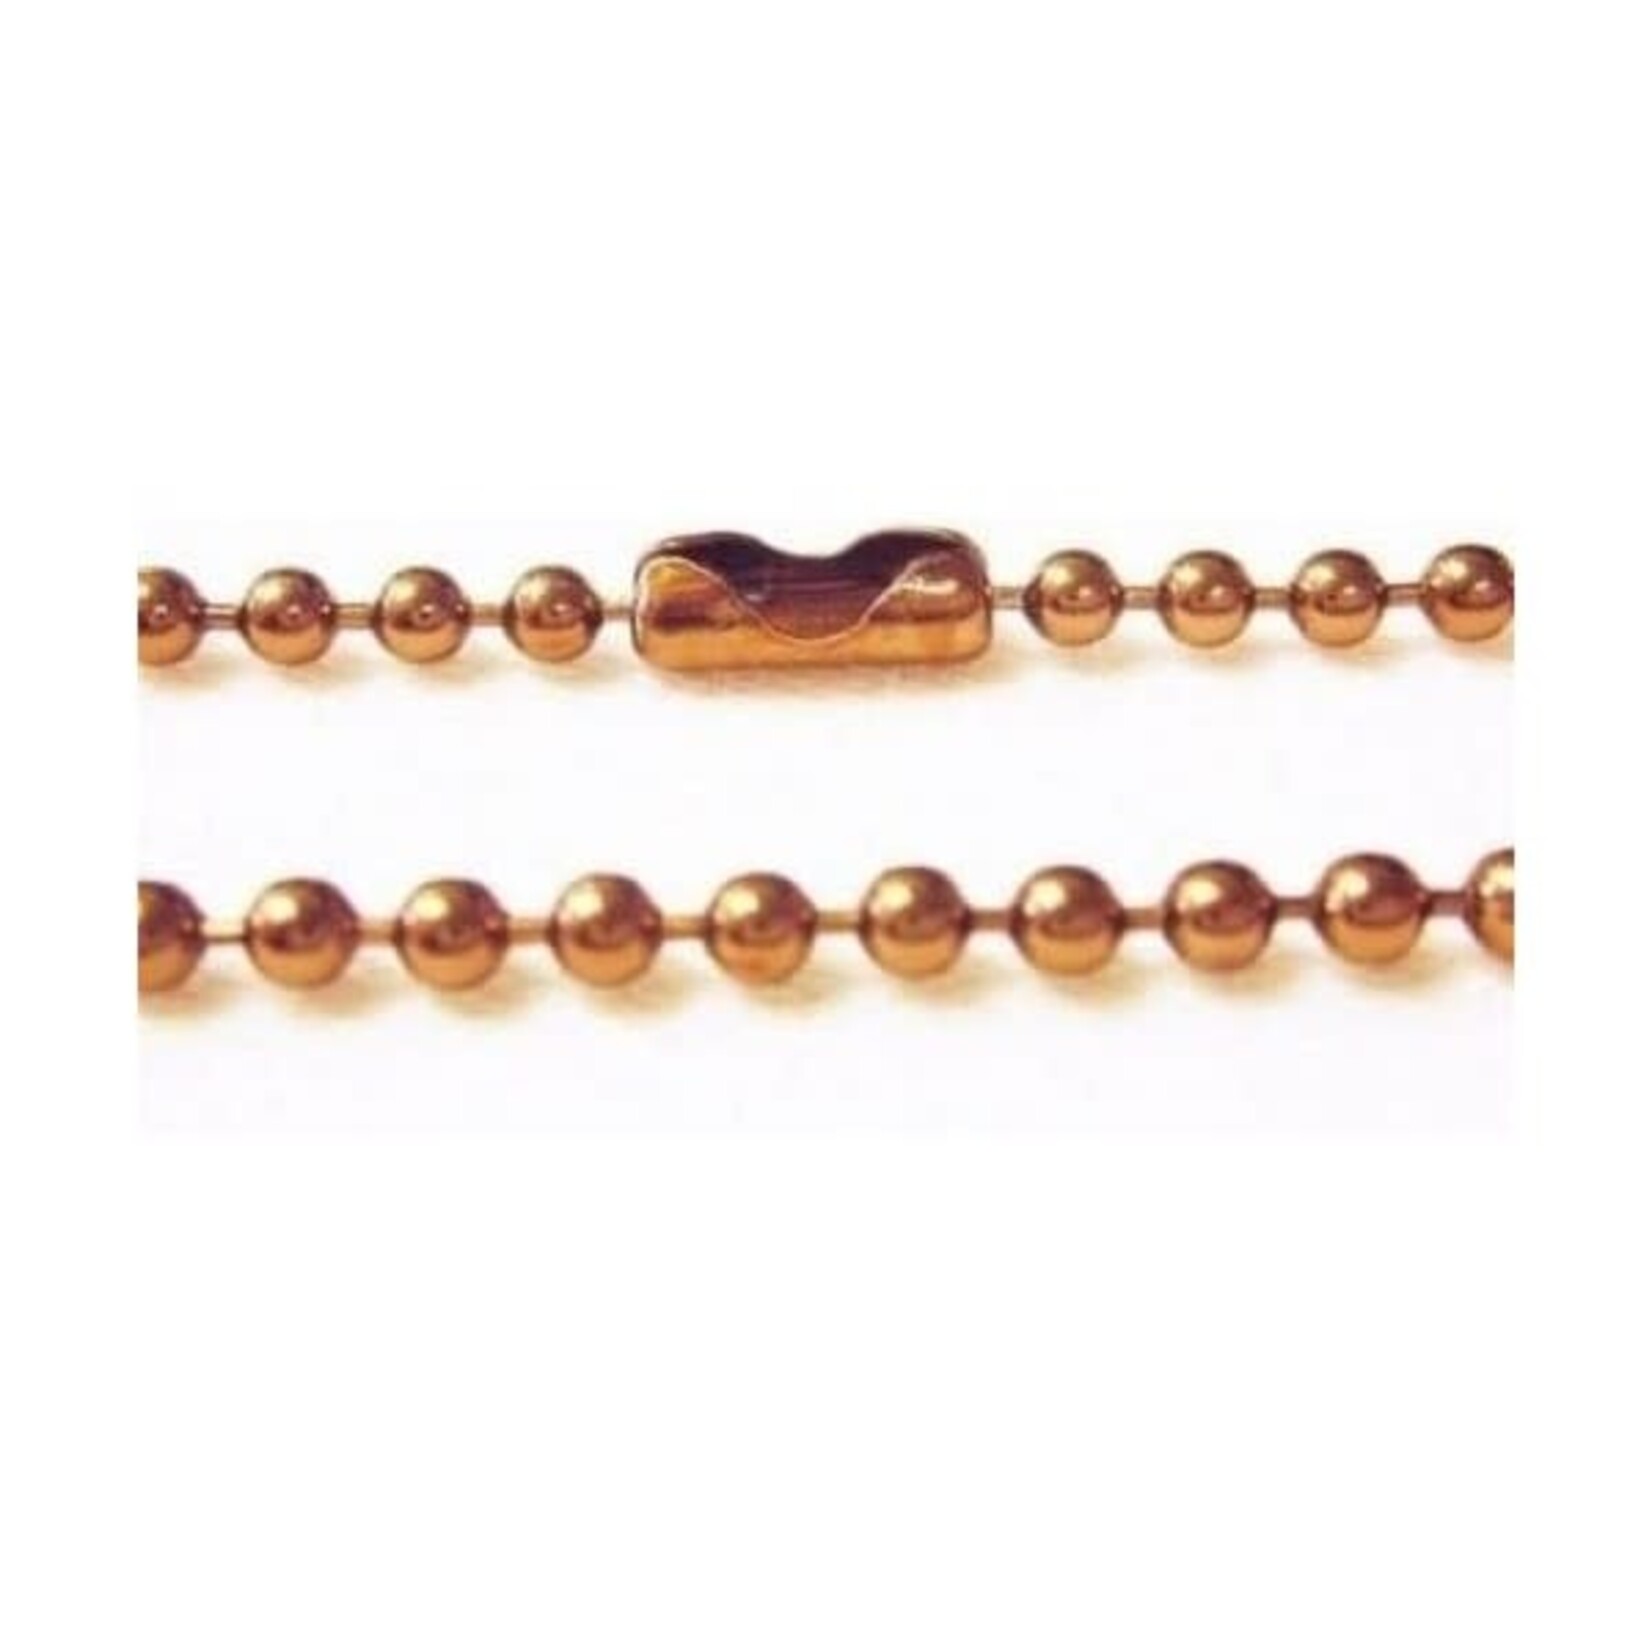 Copper ball chain connector for 2.4mm ball chain